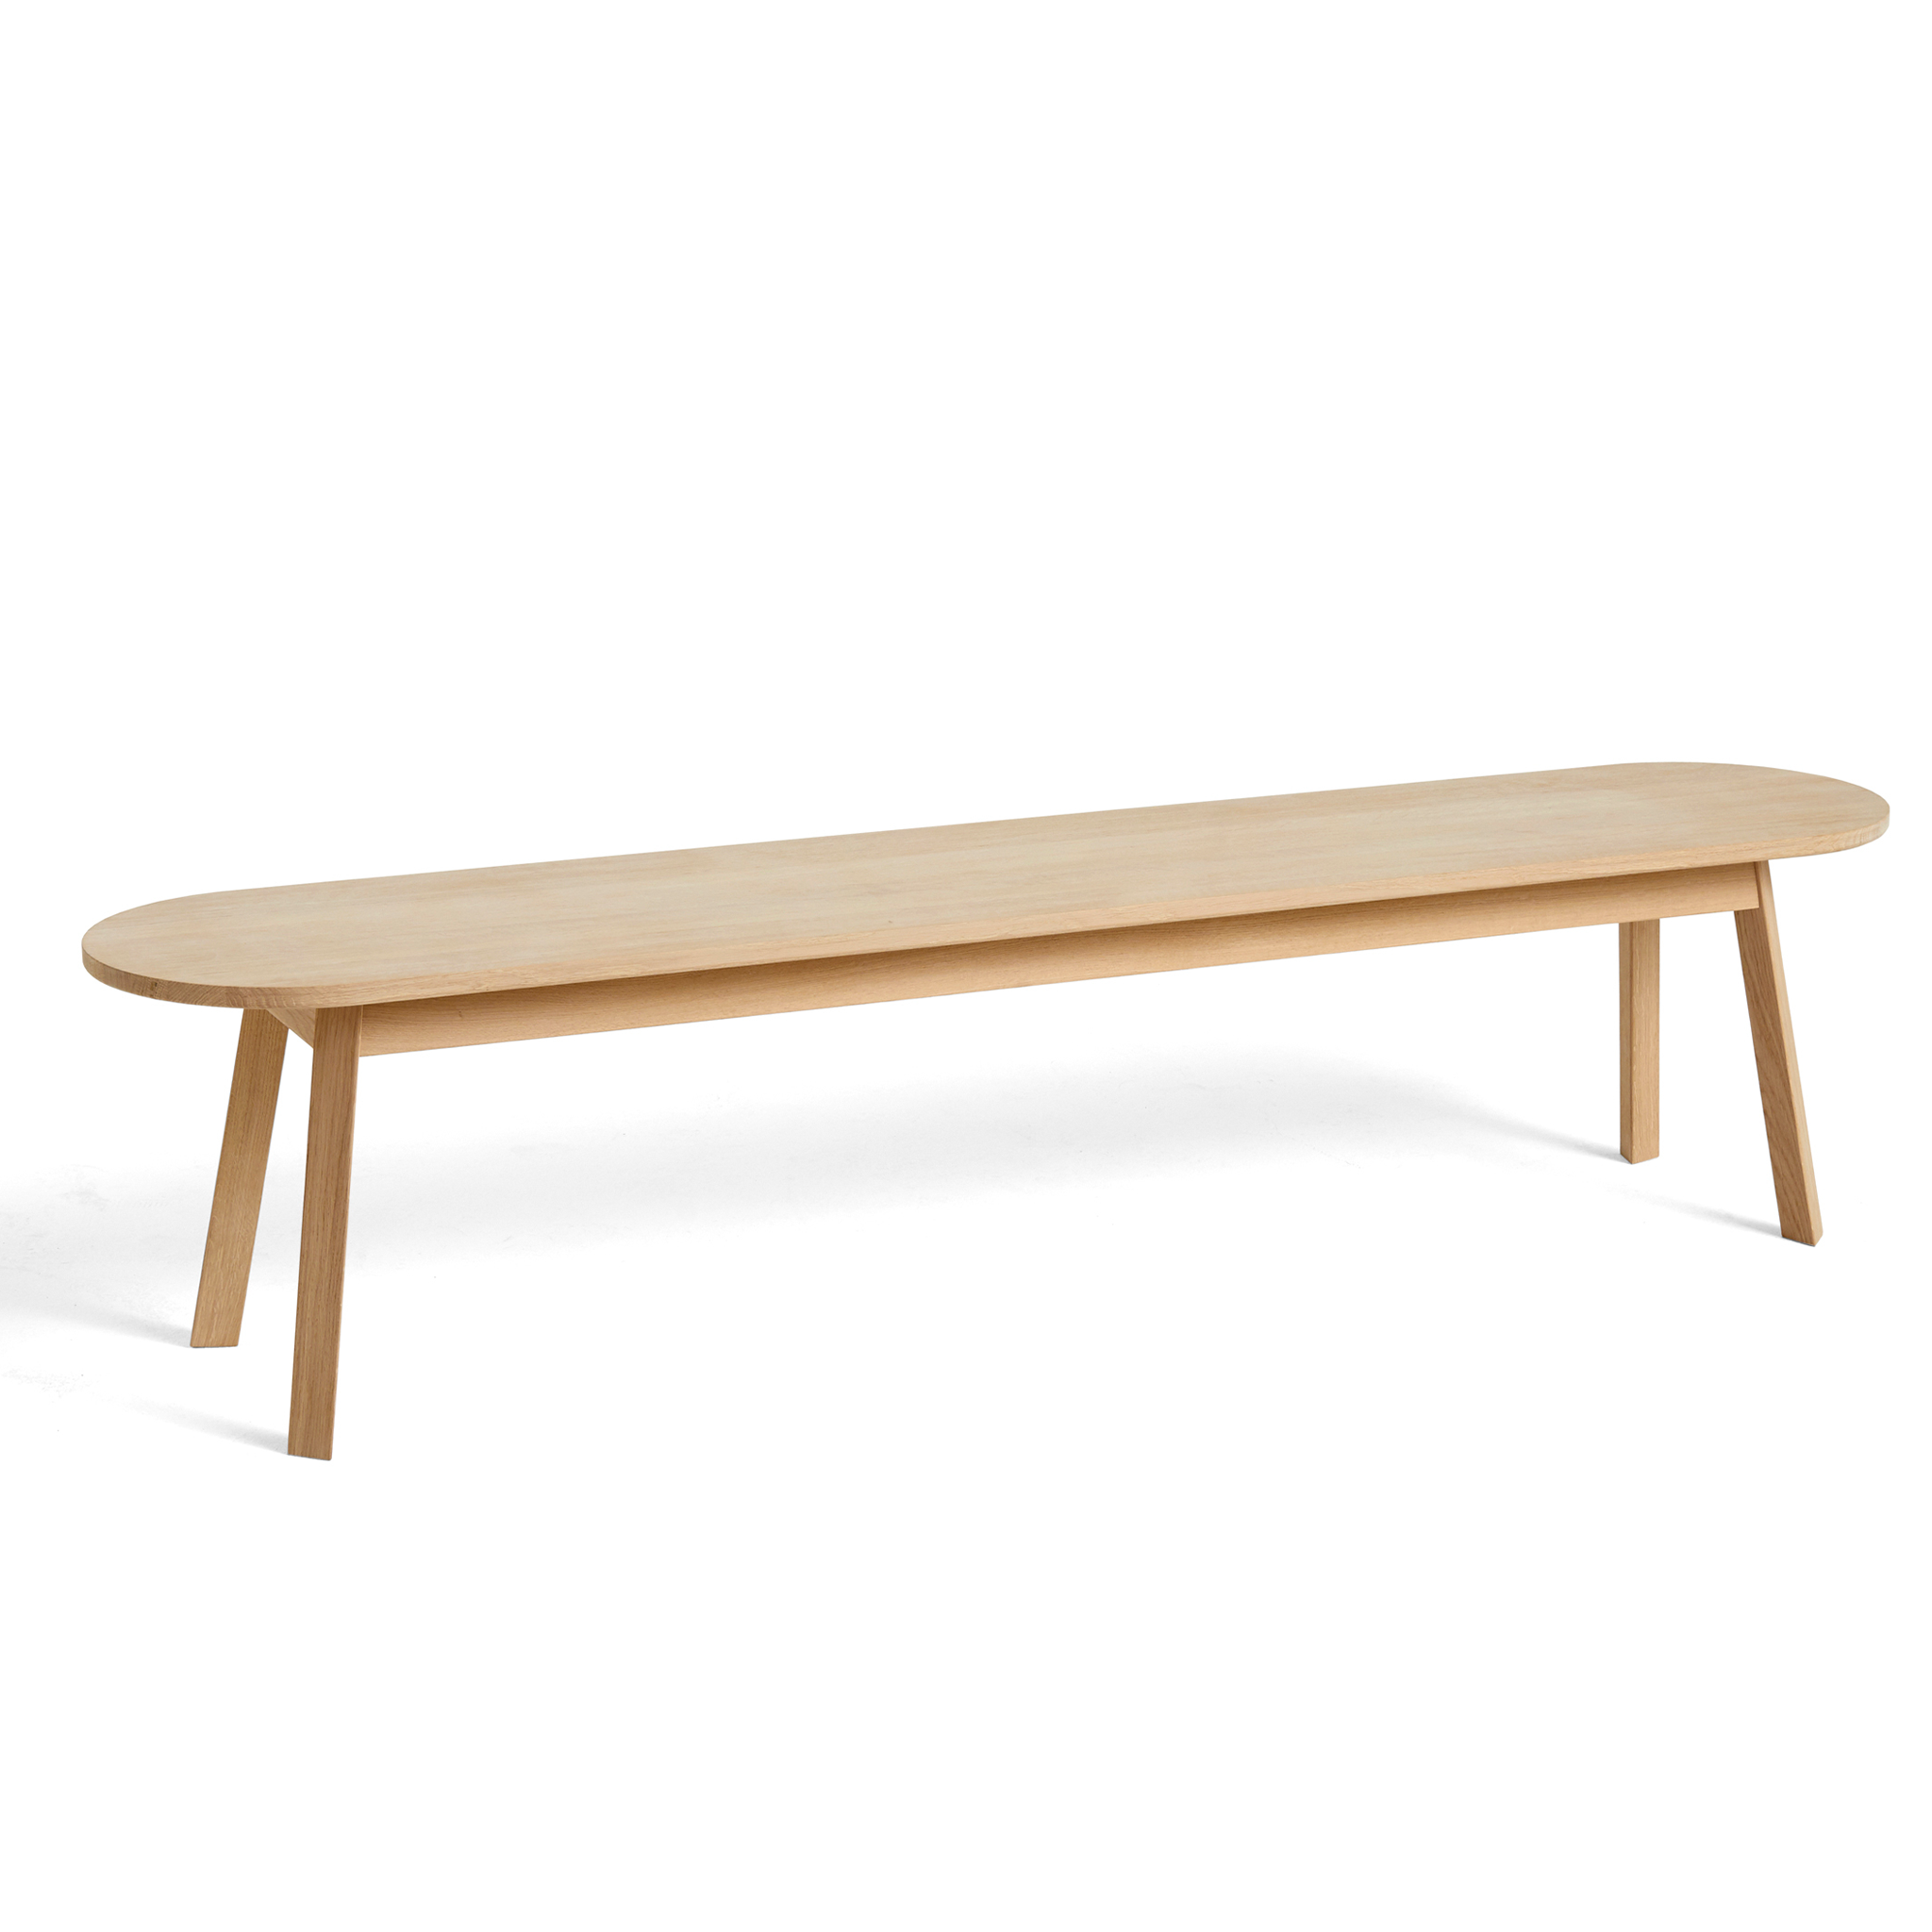 Clearance Triangle Leg Bench / L200cm / Soaped Oak by Hay